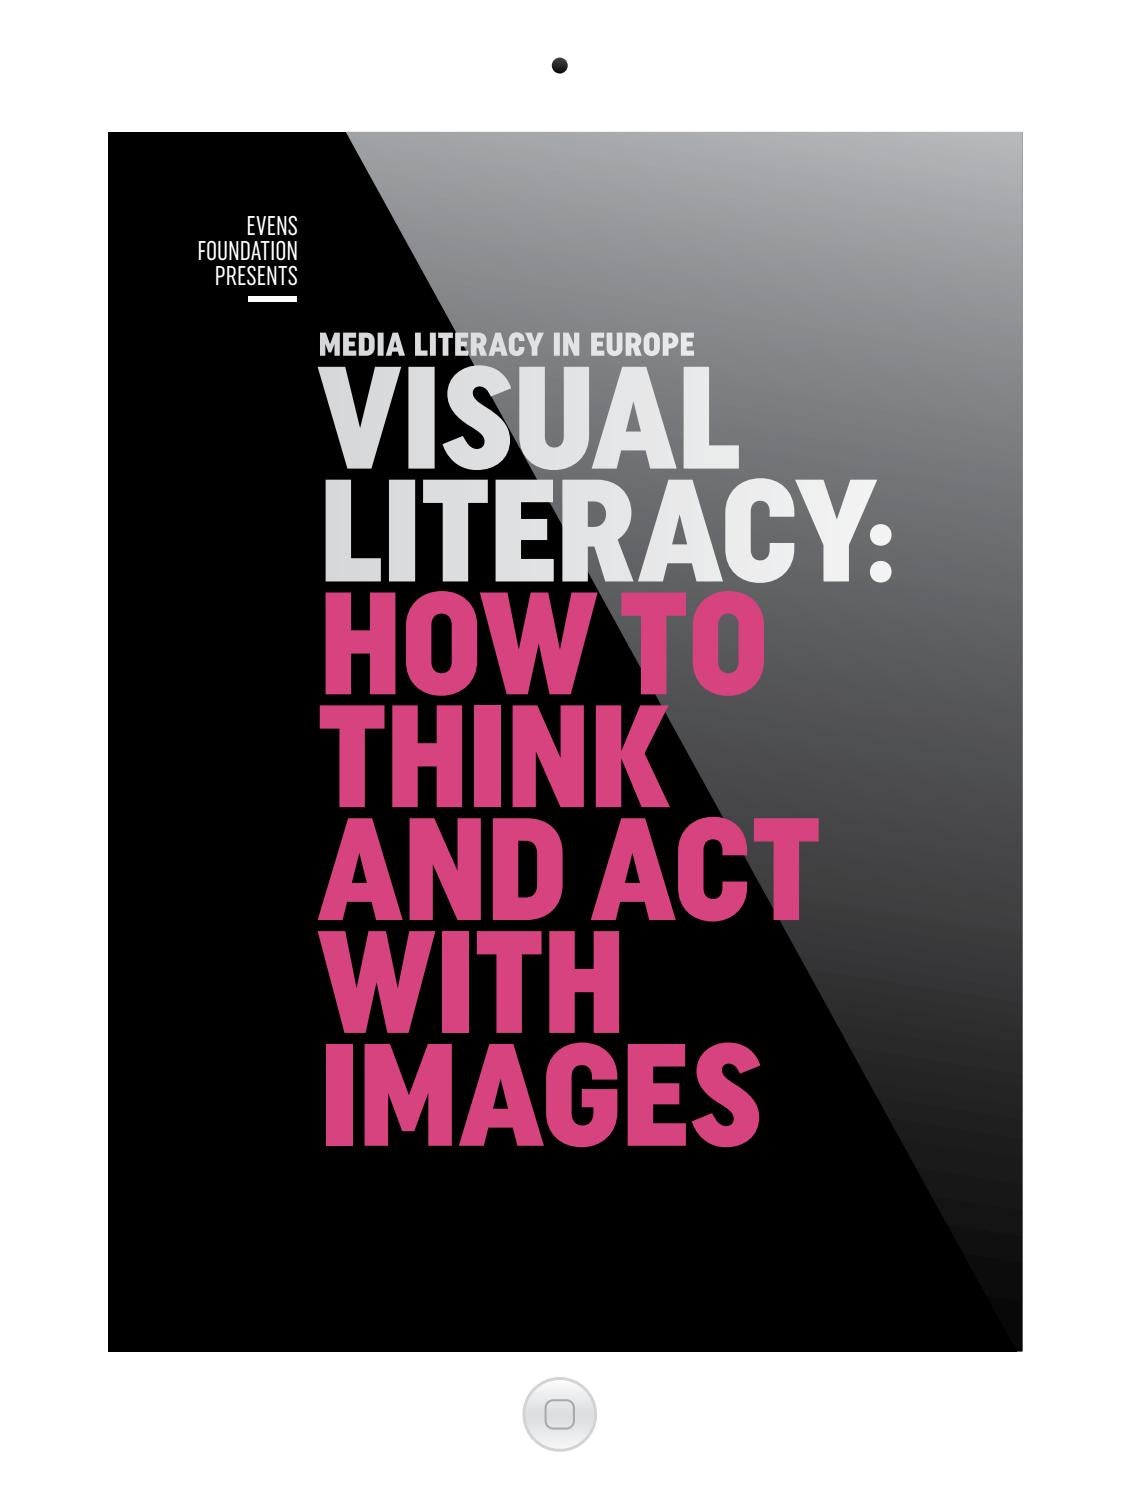 link=https://issuu.com/evensfoundation/docs/medialiteracy_singlepages Media Literacy in Europe: Visual literacy - how to think and act with images